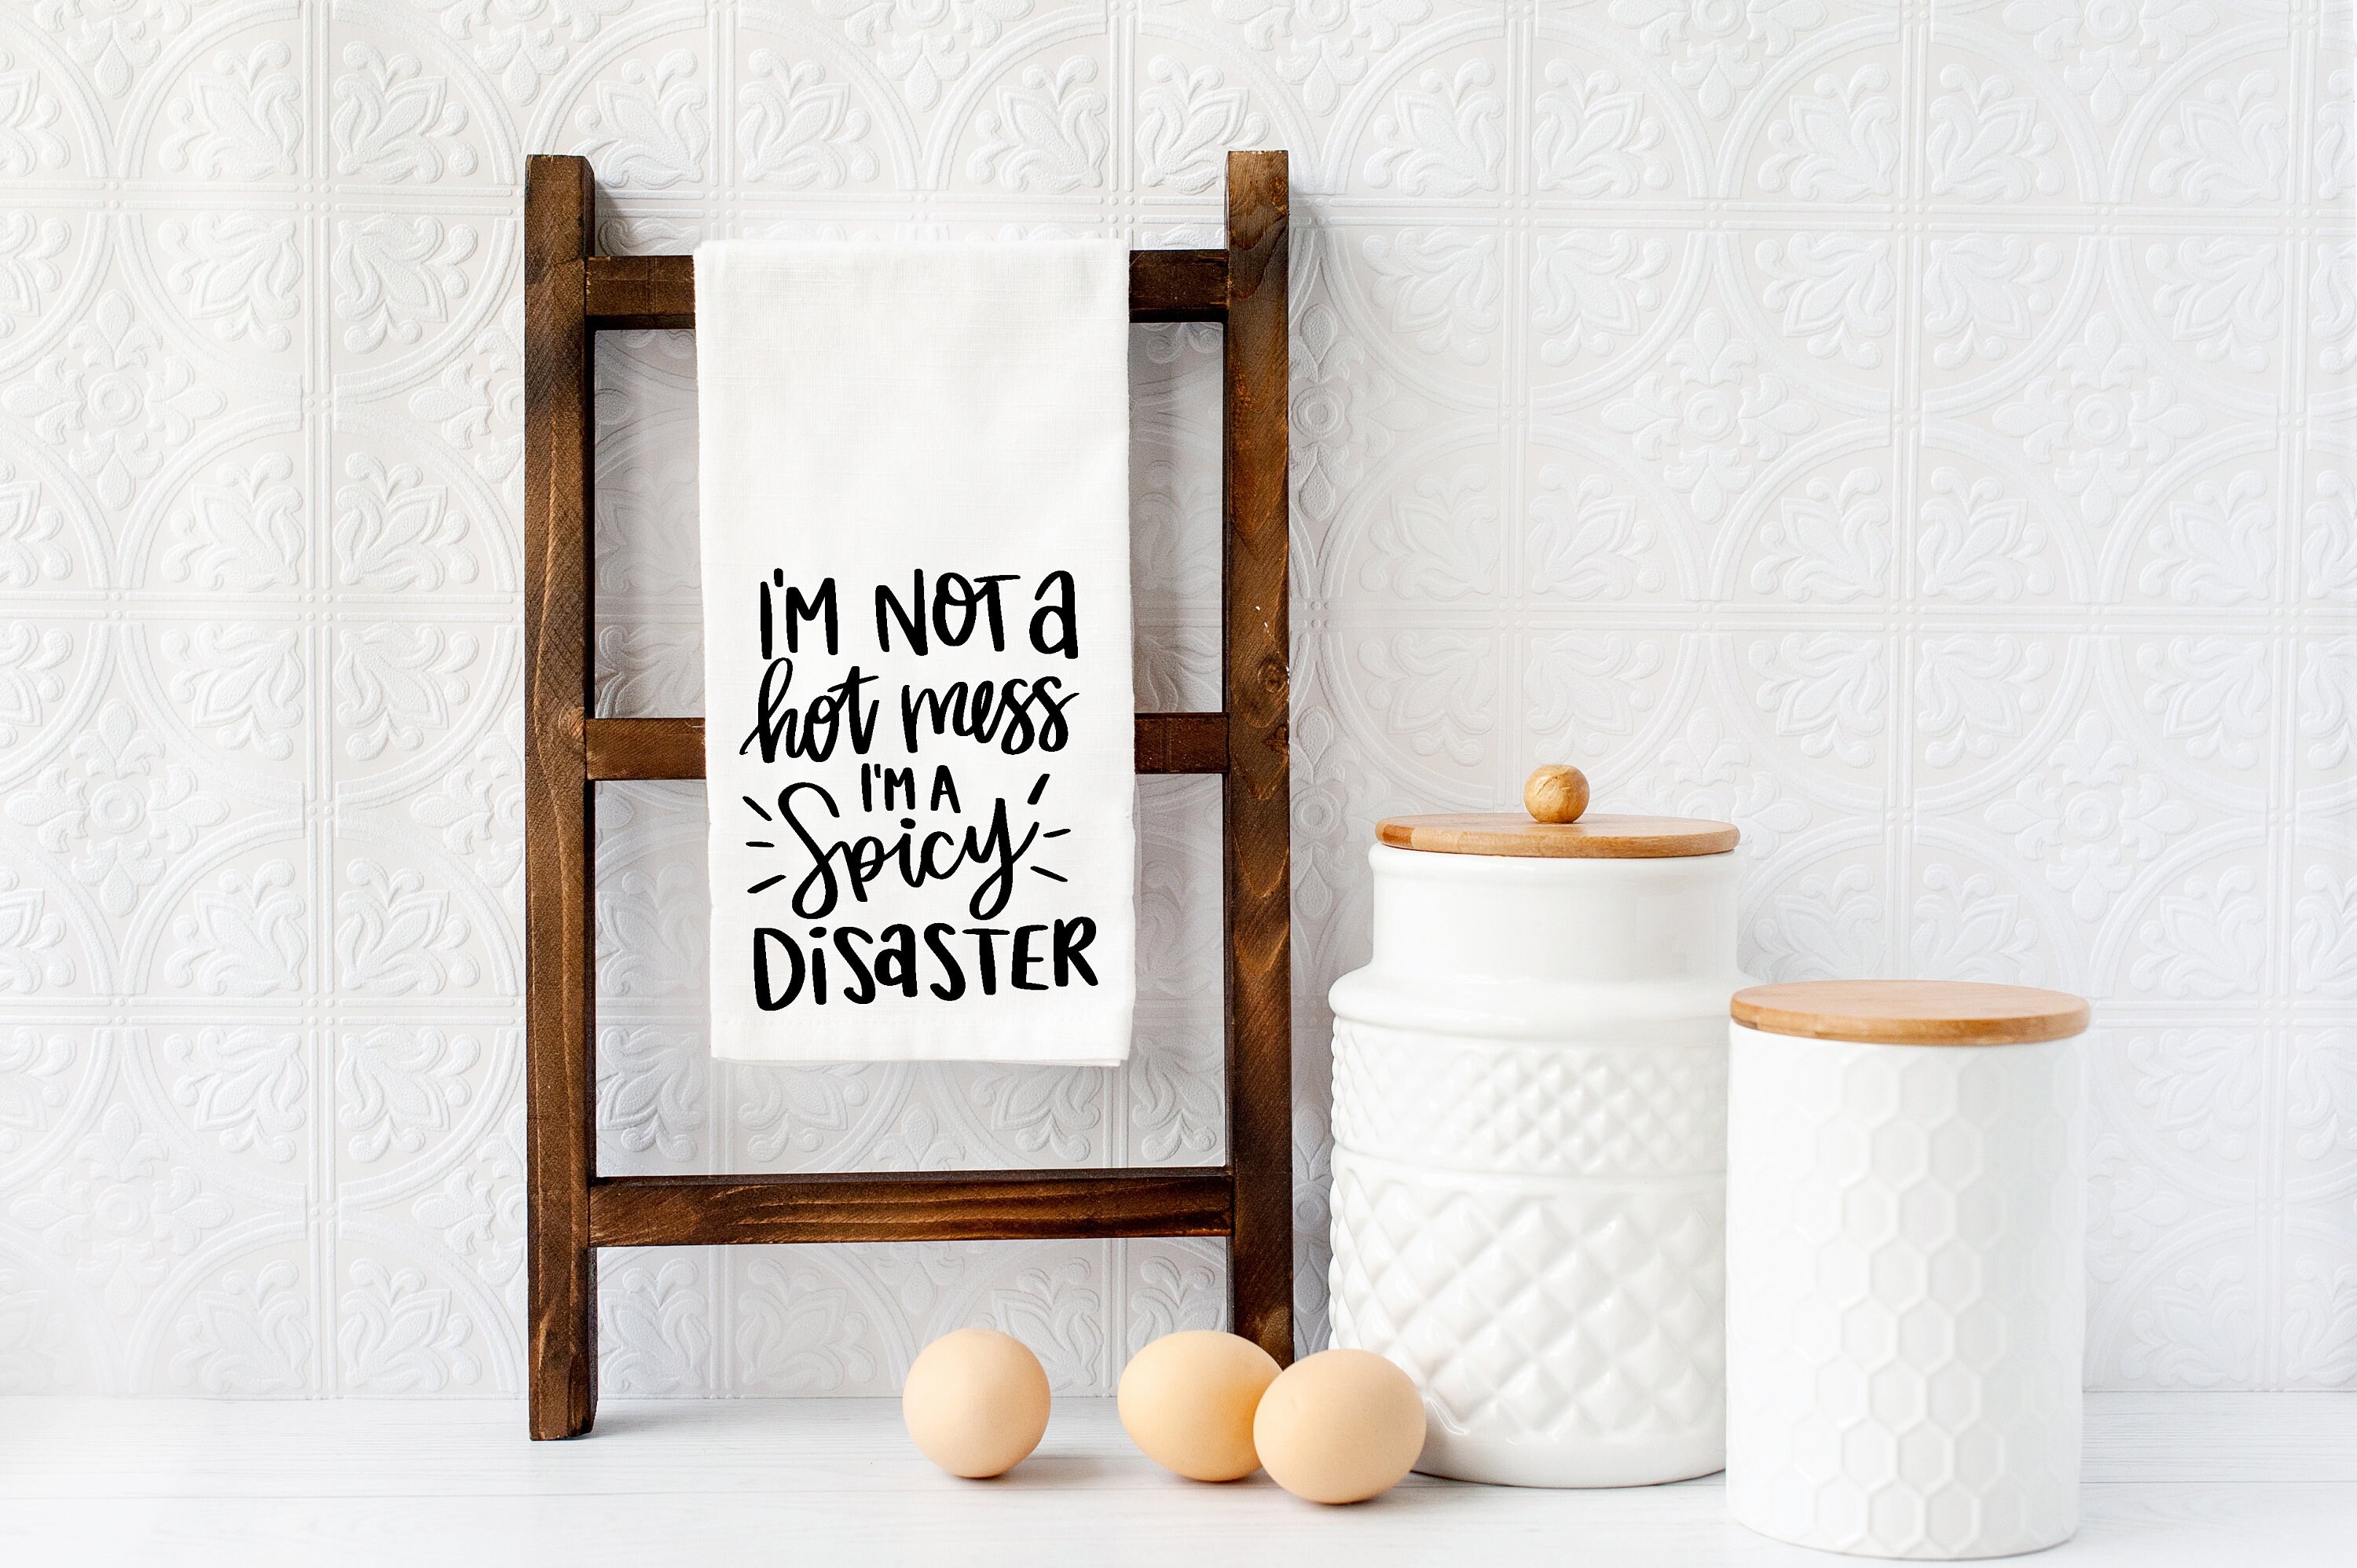 You're Not A Hot Mess, You're a Spicy Disaster - Funny Tea Towel - Snarky  and Sarcastic Kitchen Towel - Funny Kitchen Towels - Gift for BFF